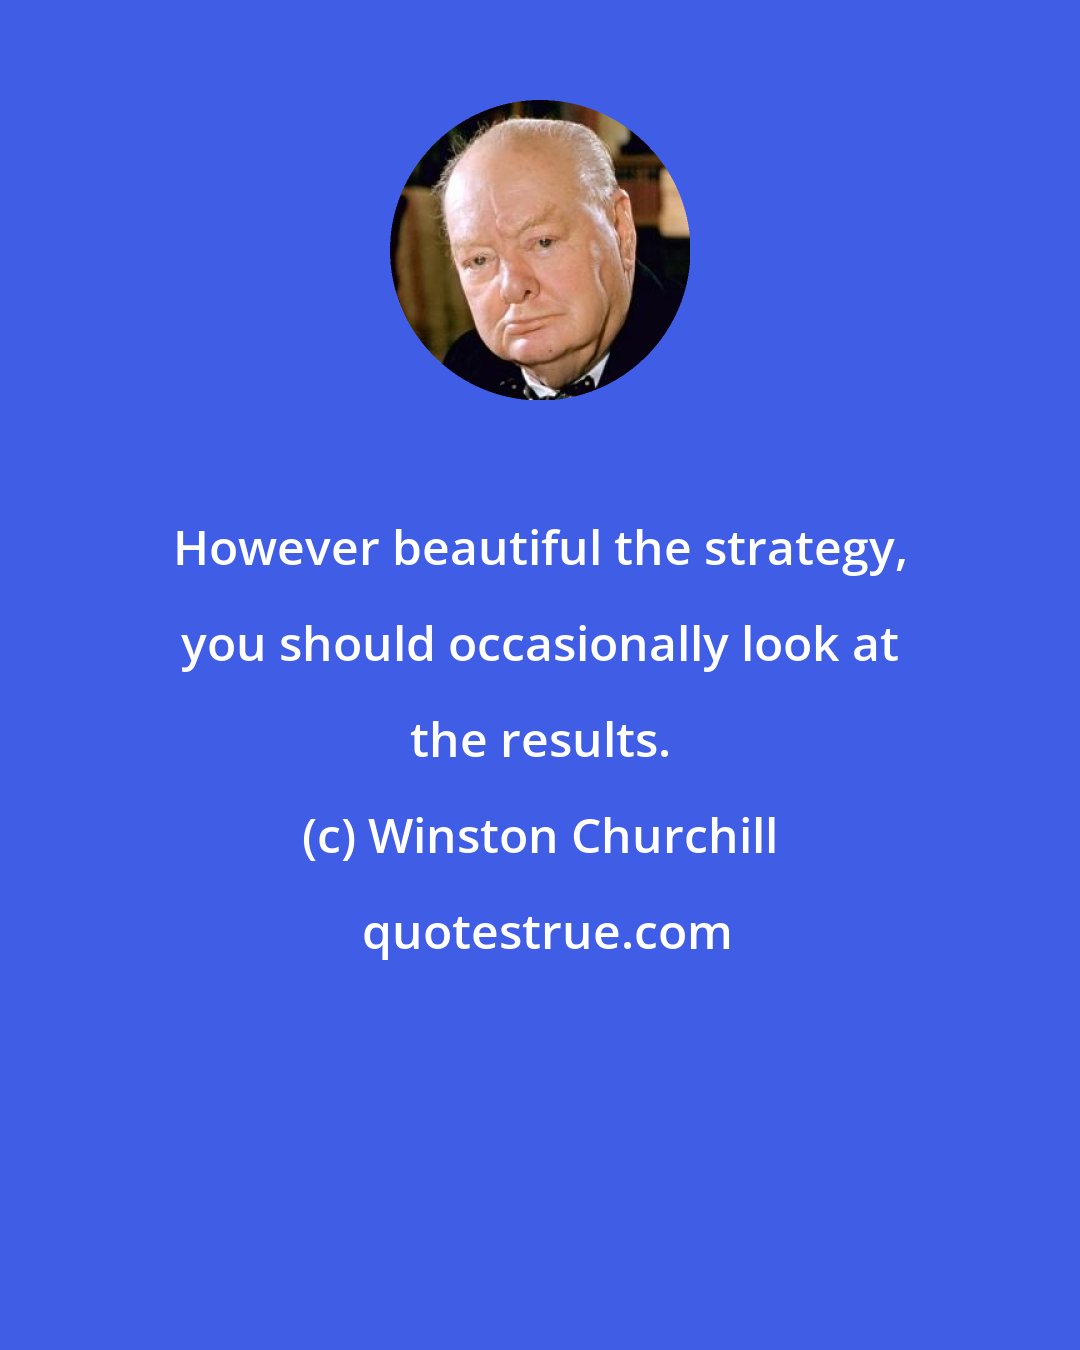 Winston Churchill: However beautiful the strategy, you should occasionally look at the results.